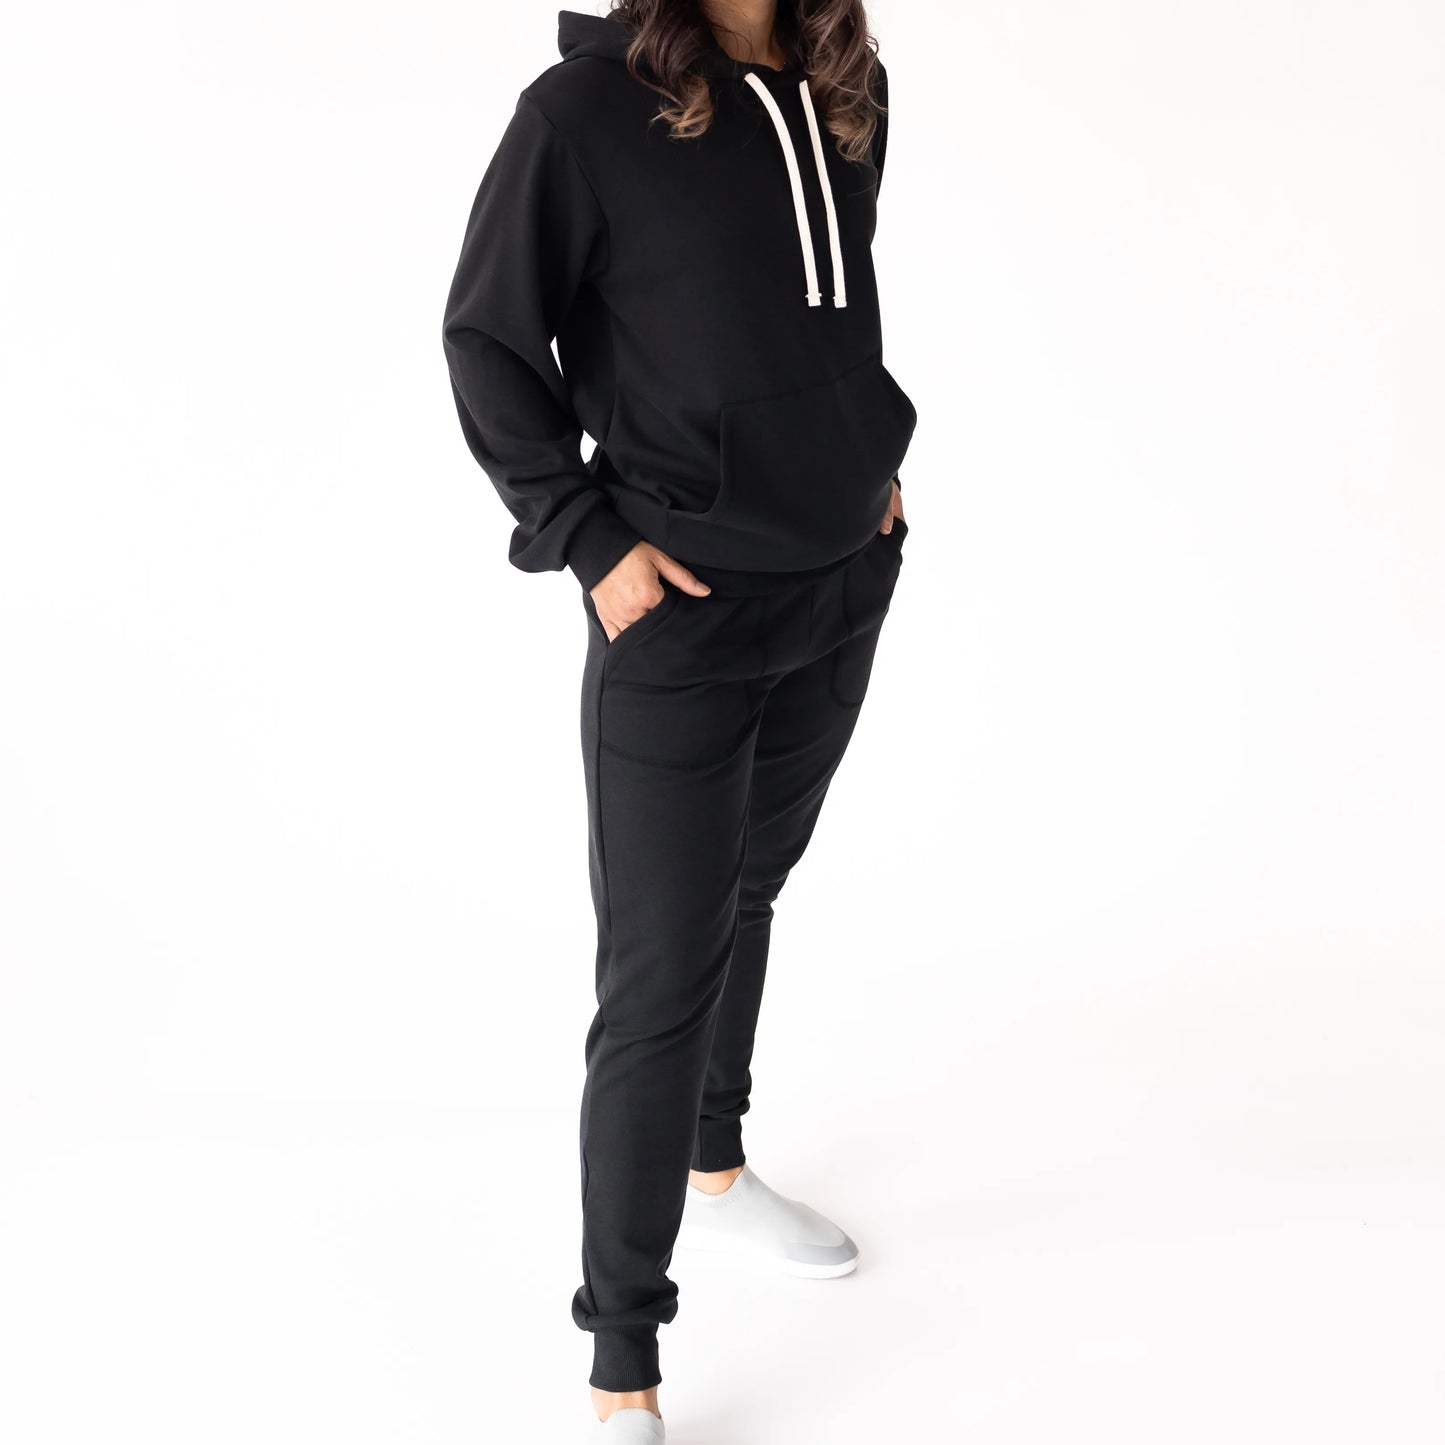 Chaser Cotton Fleece Lined Jogger Pants in Black